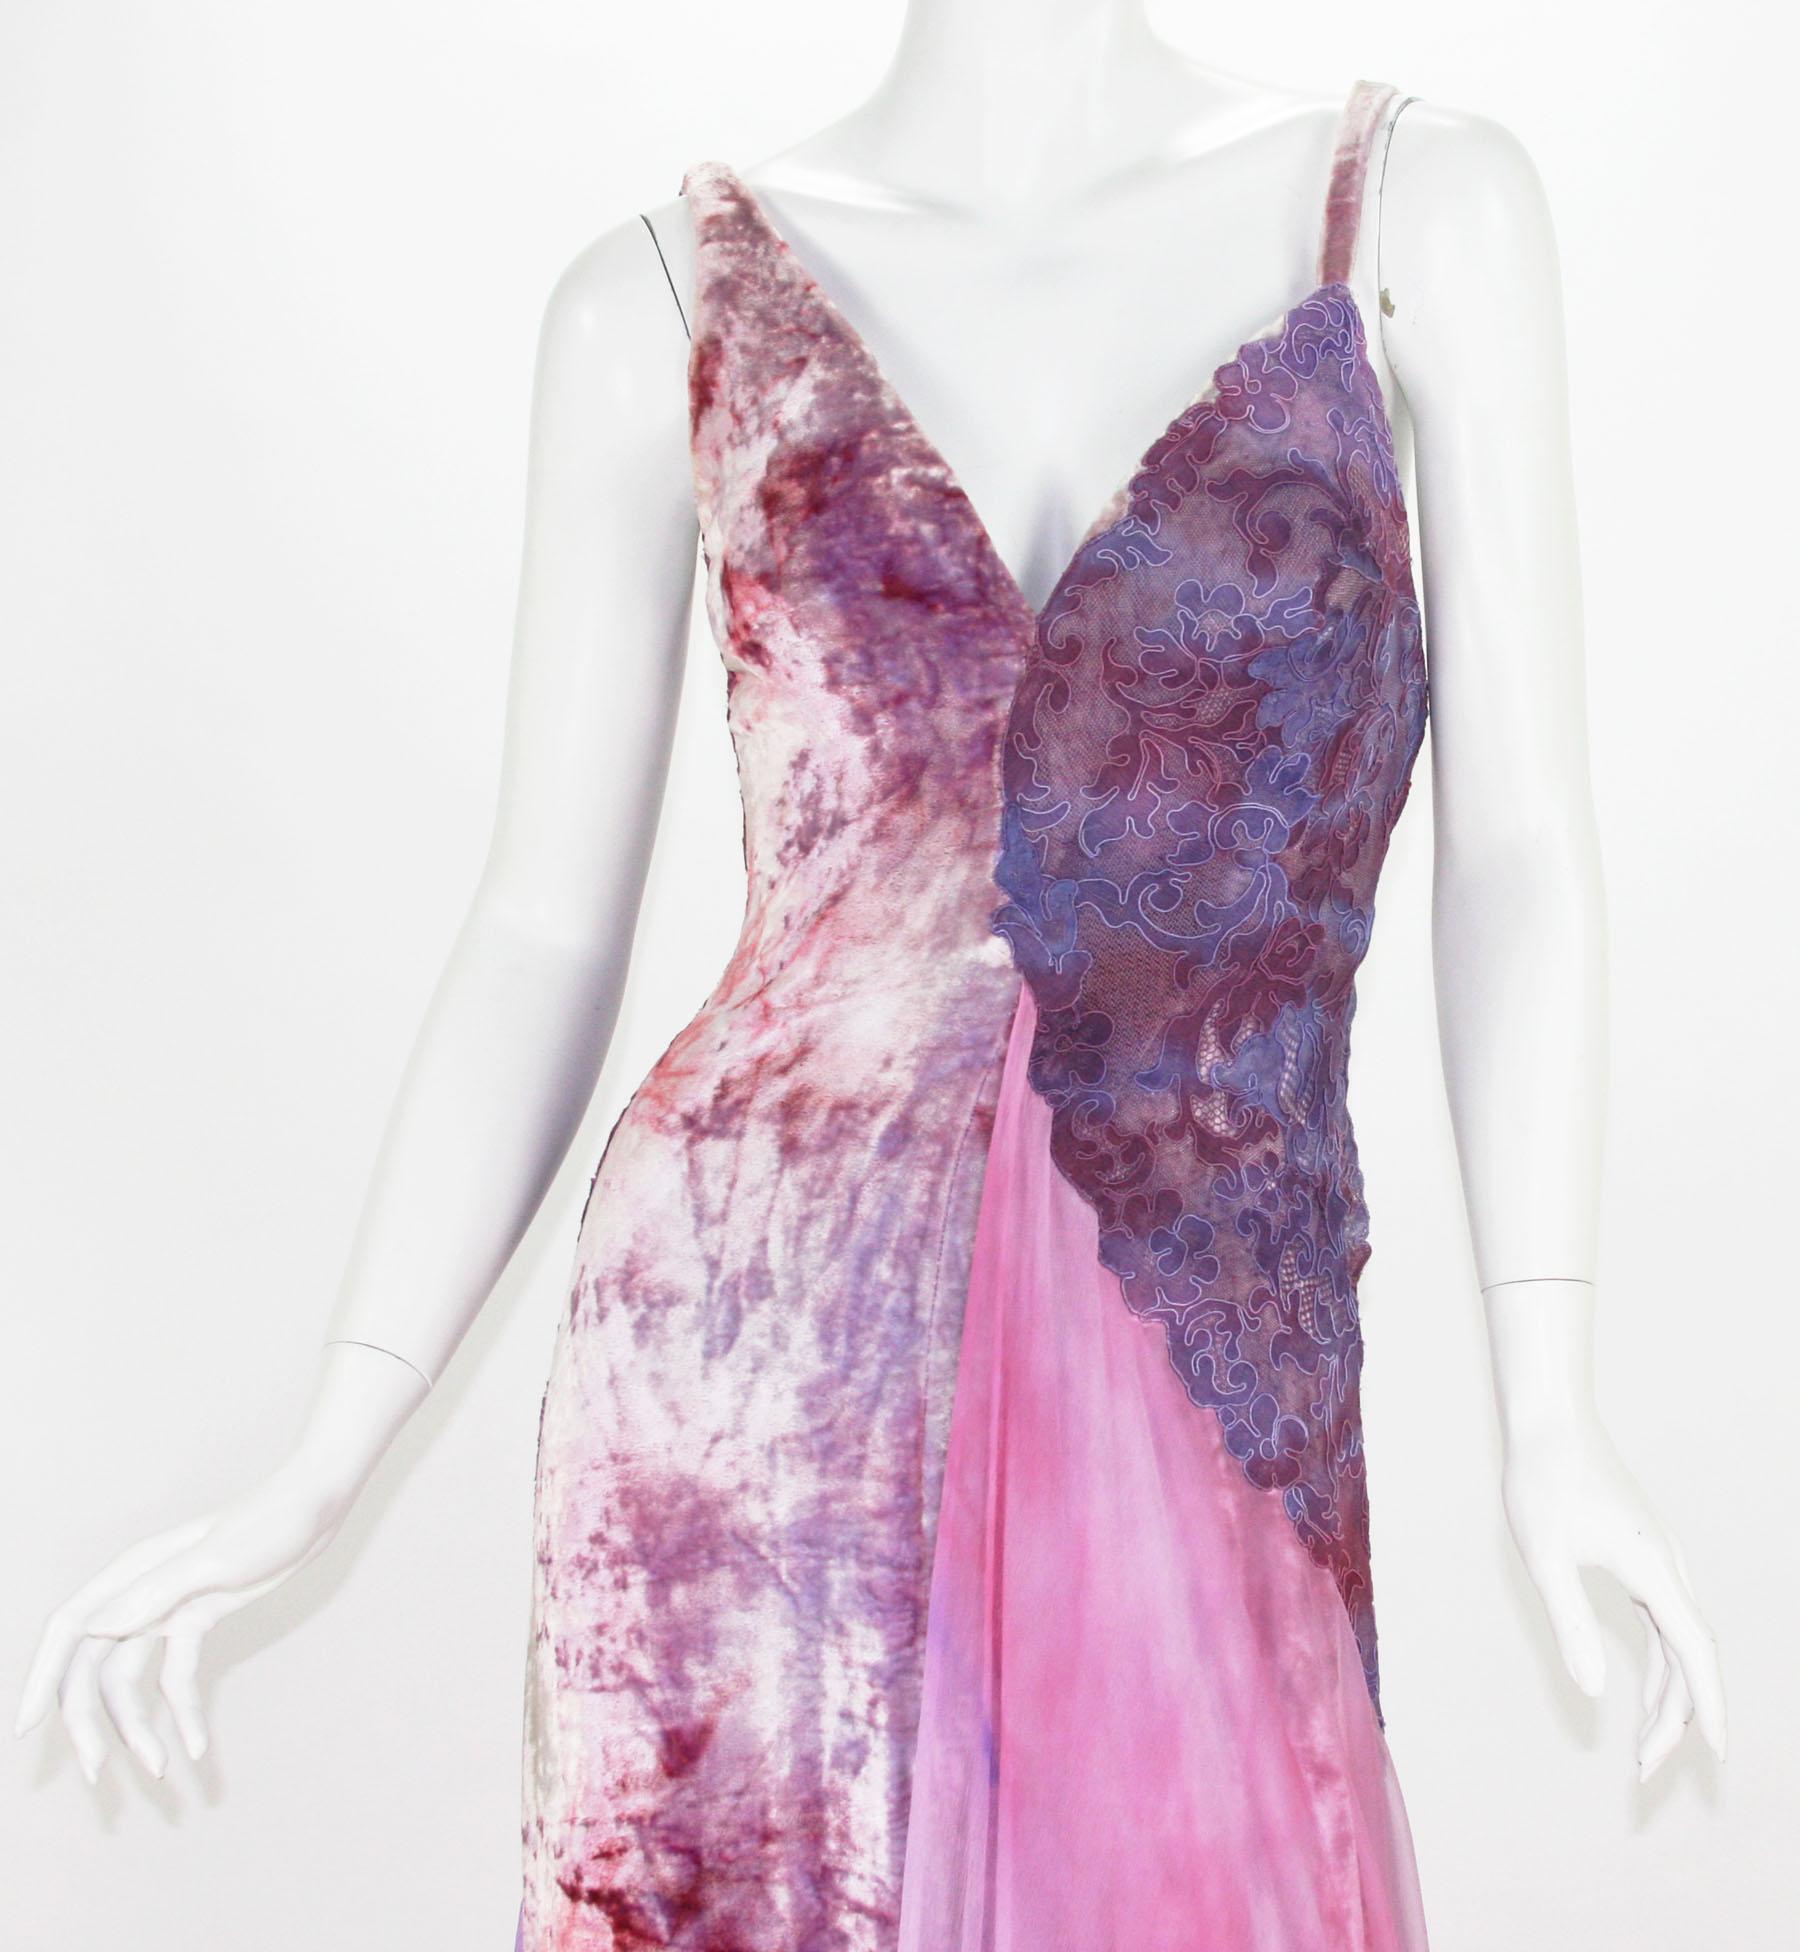 Women's New Atelier Versace S/S 1994 Collection Velvet Lace Purple Pink Dress Gown  For Sale